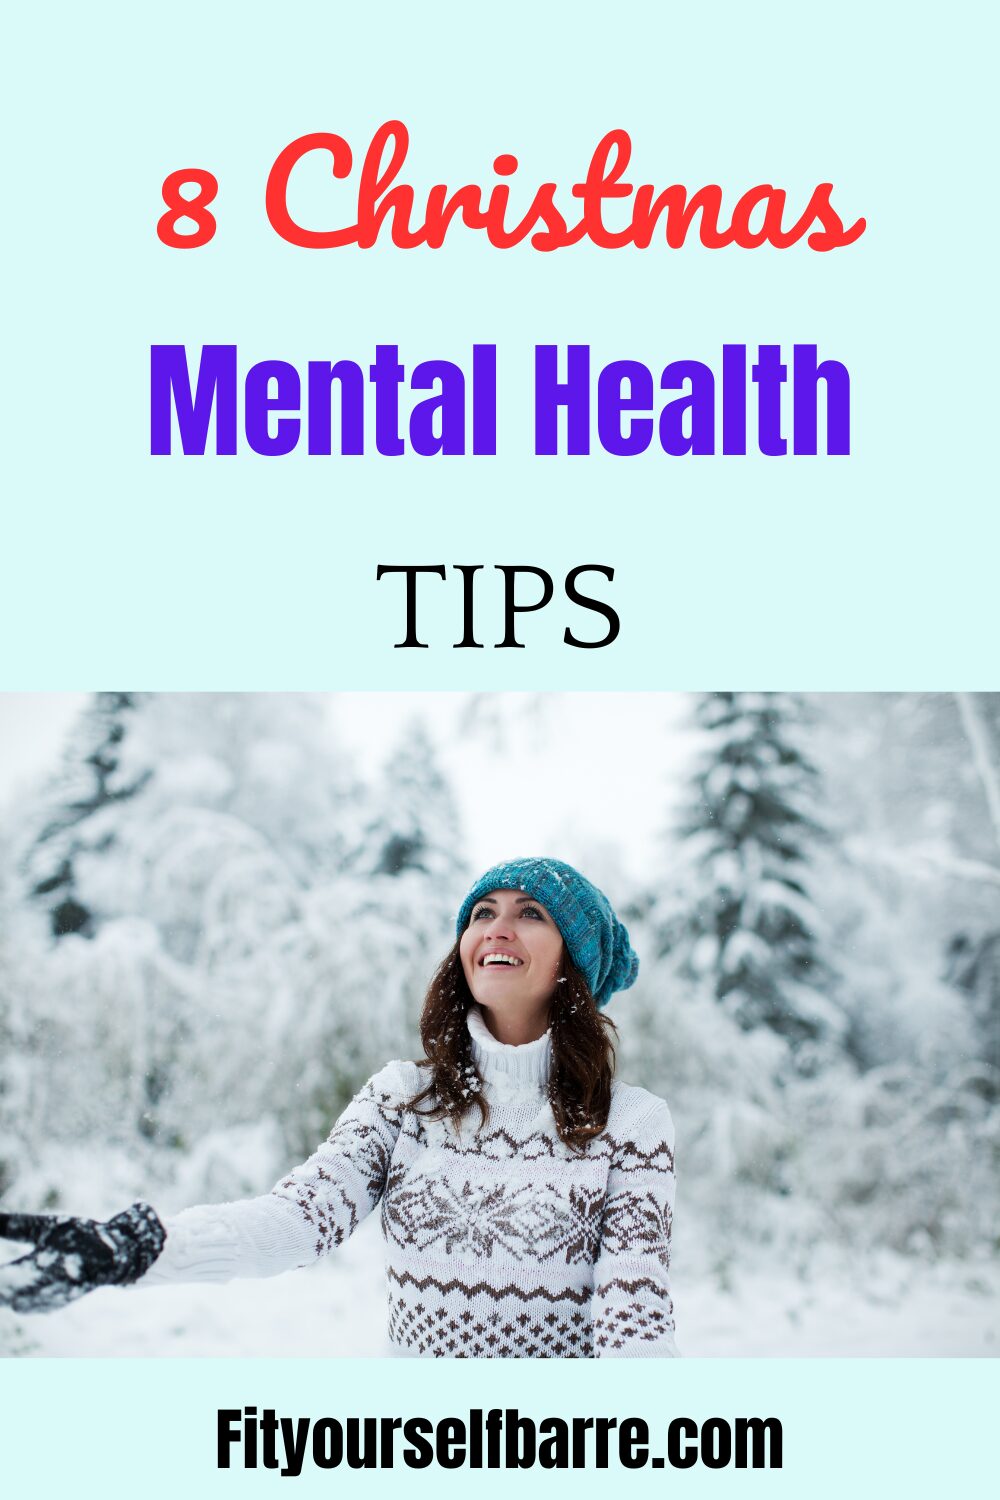 christmas mental health tips-woman getting fresh air in the winter forest